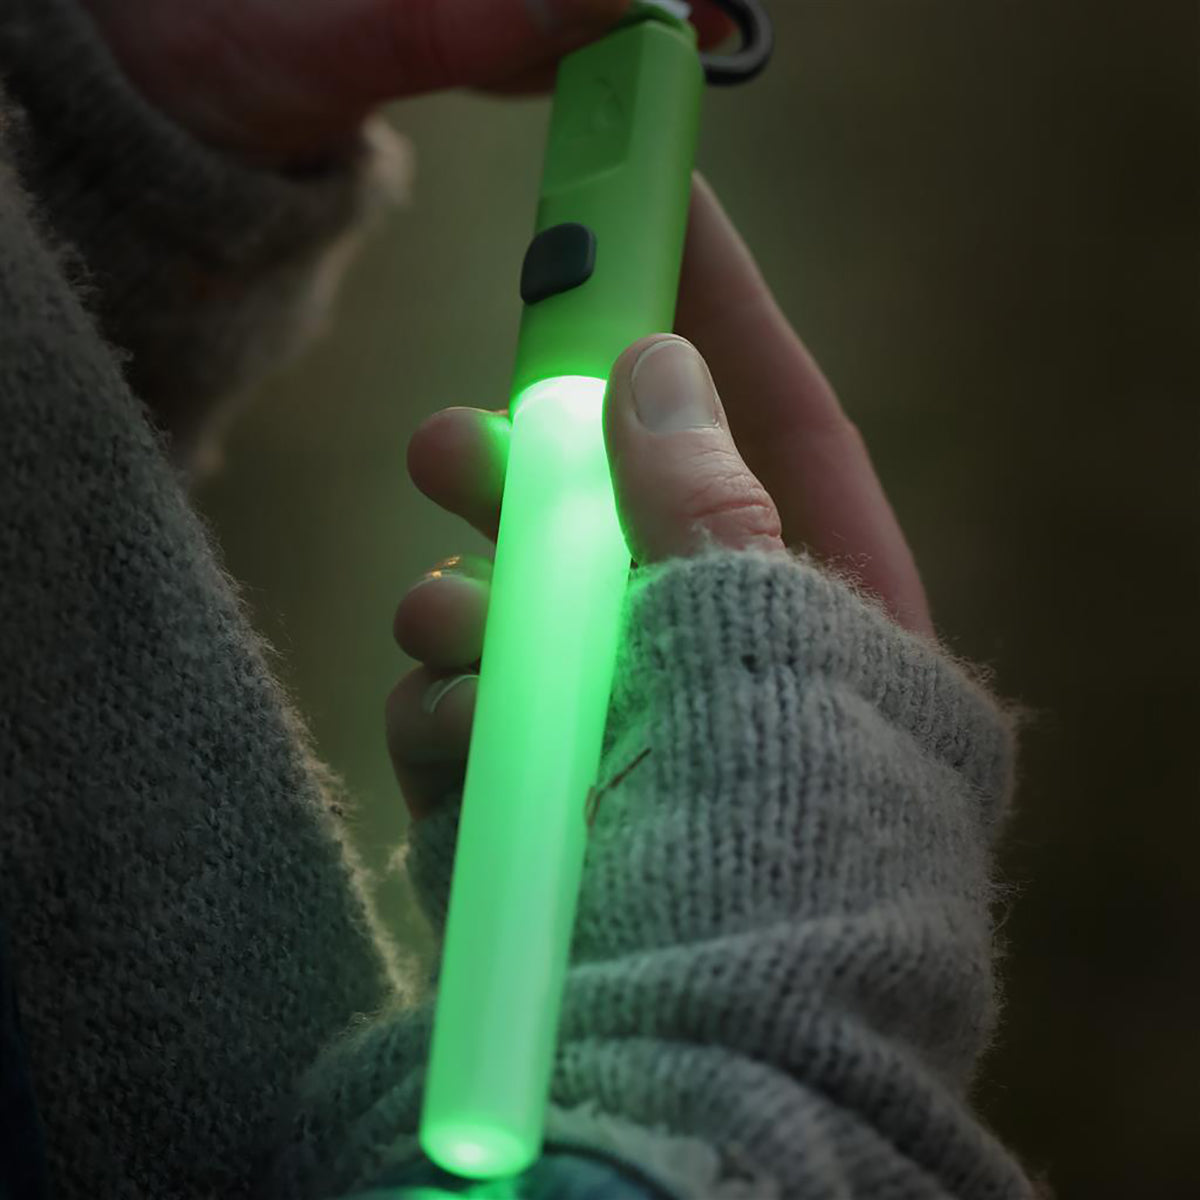 Coghlan's Outdoor Survival Emergency LED Lightstick for Camping, Hiking Coghlan's